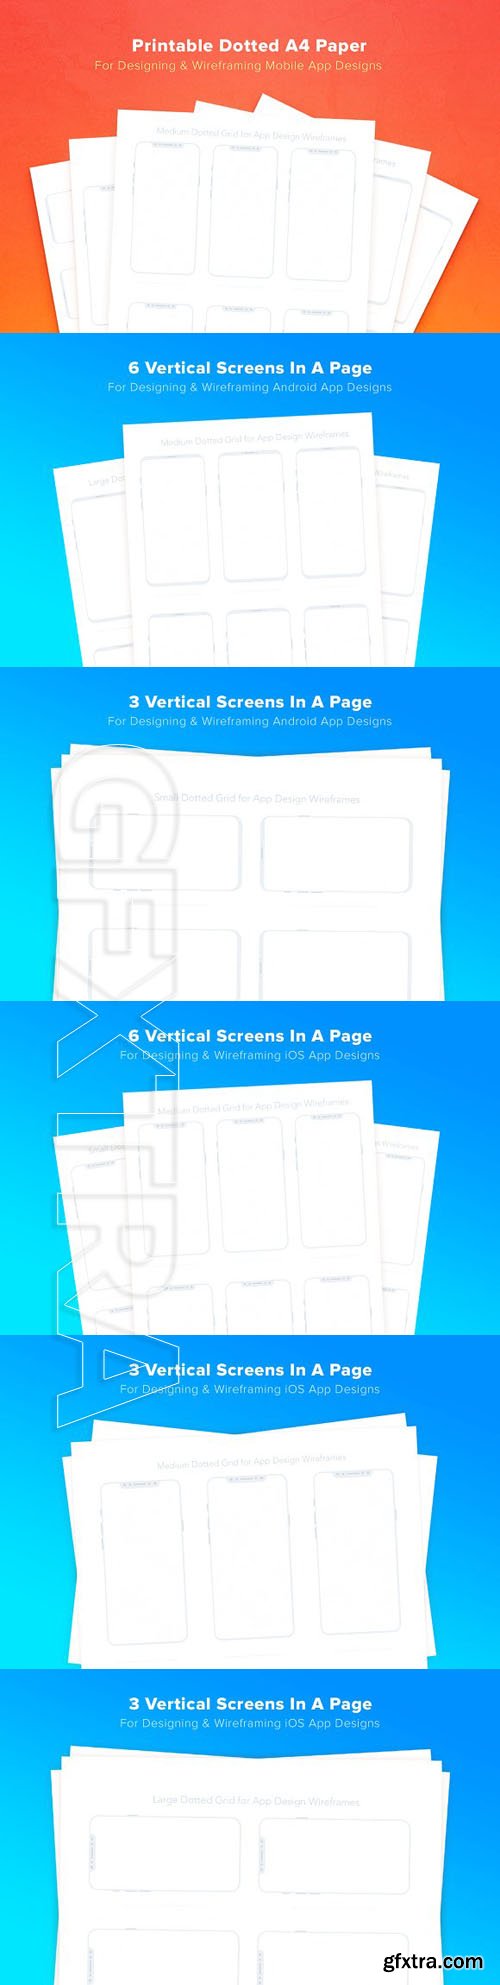 CreativeMarket - A4 Dotted Paper for App Designs 1827185